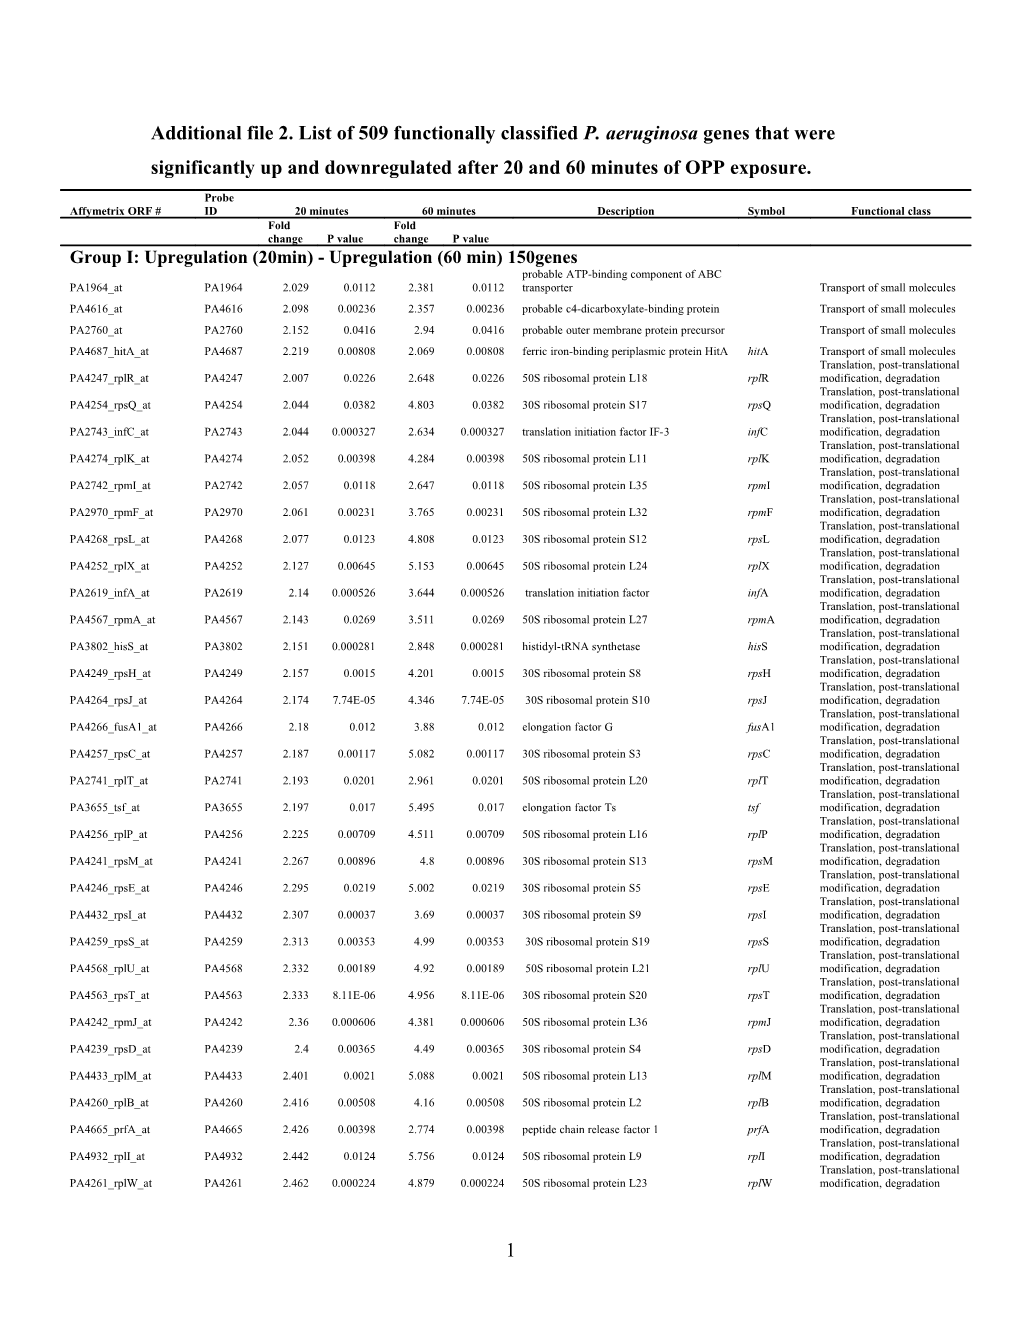 Additional File 2. List of 509 Functionally Classified P. Aeruginosa Genes That Were